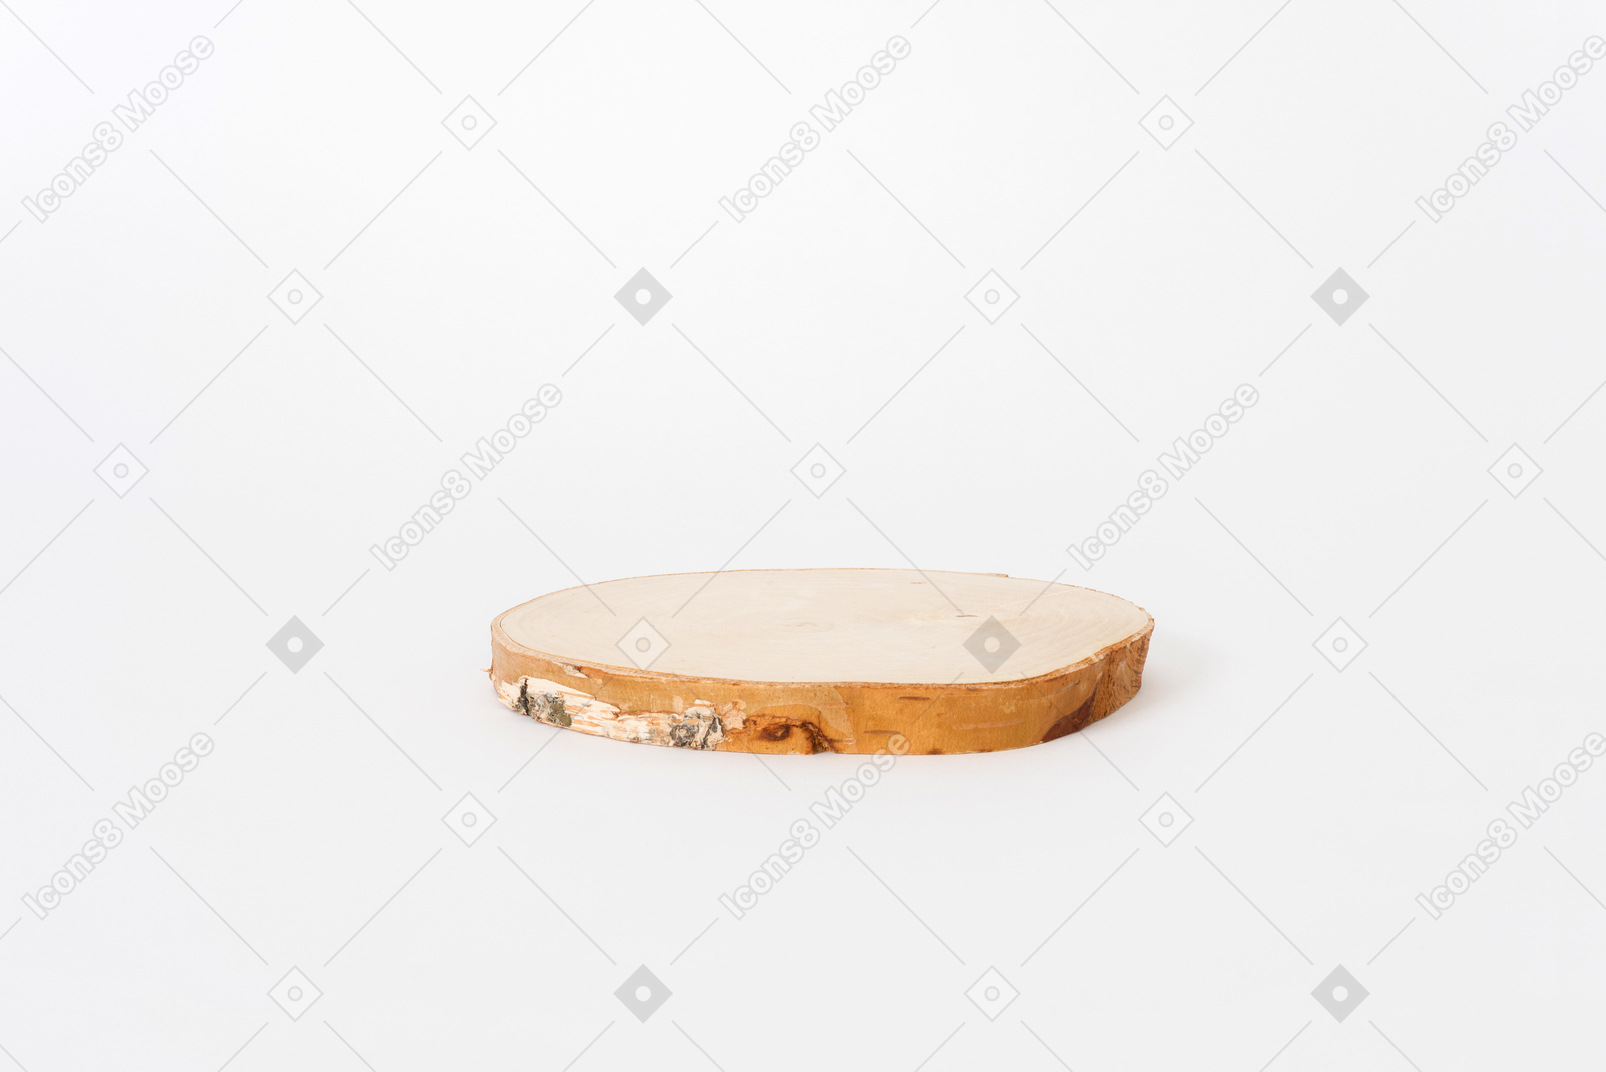 Tree trunk cross section on white background